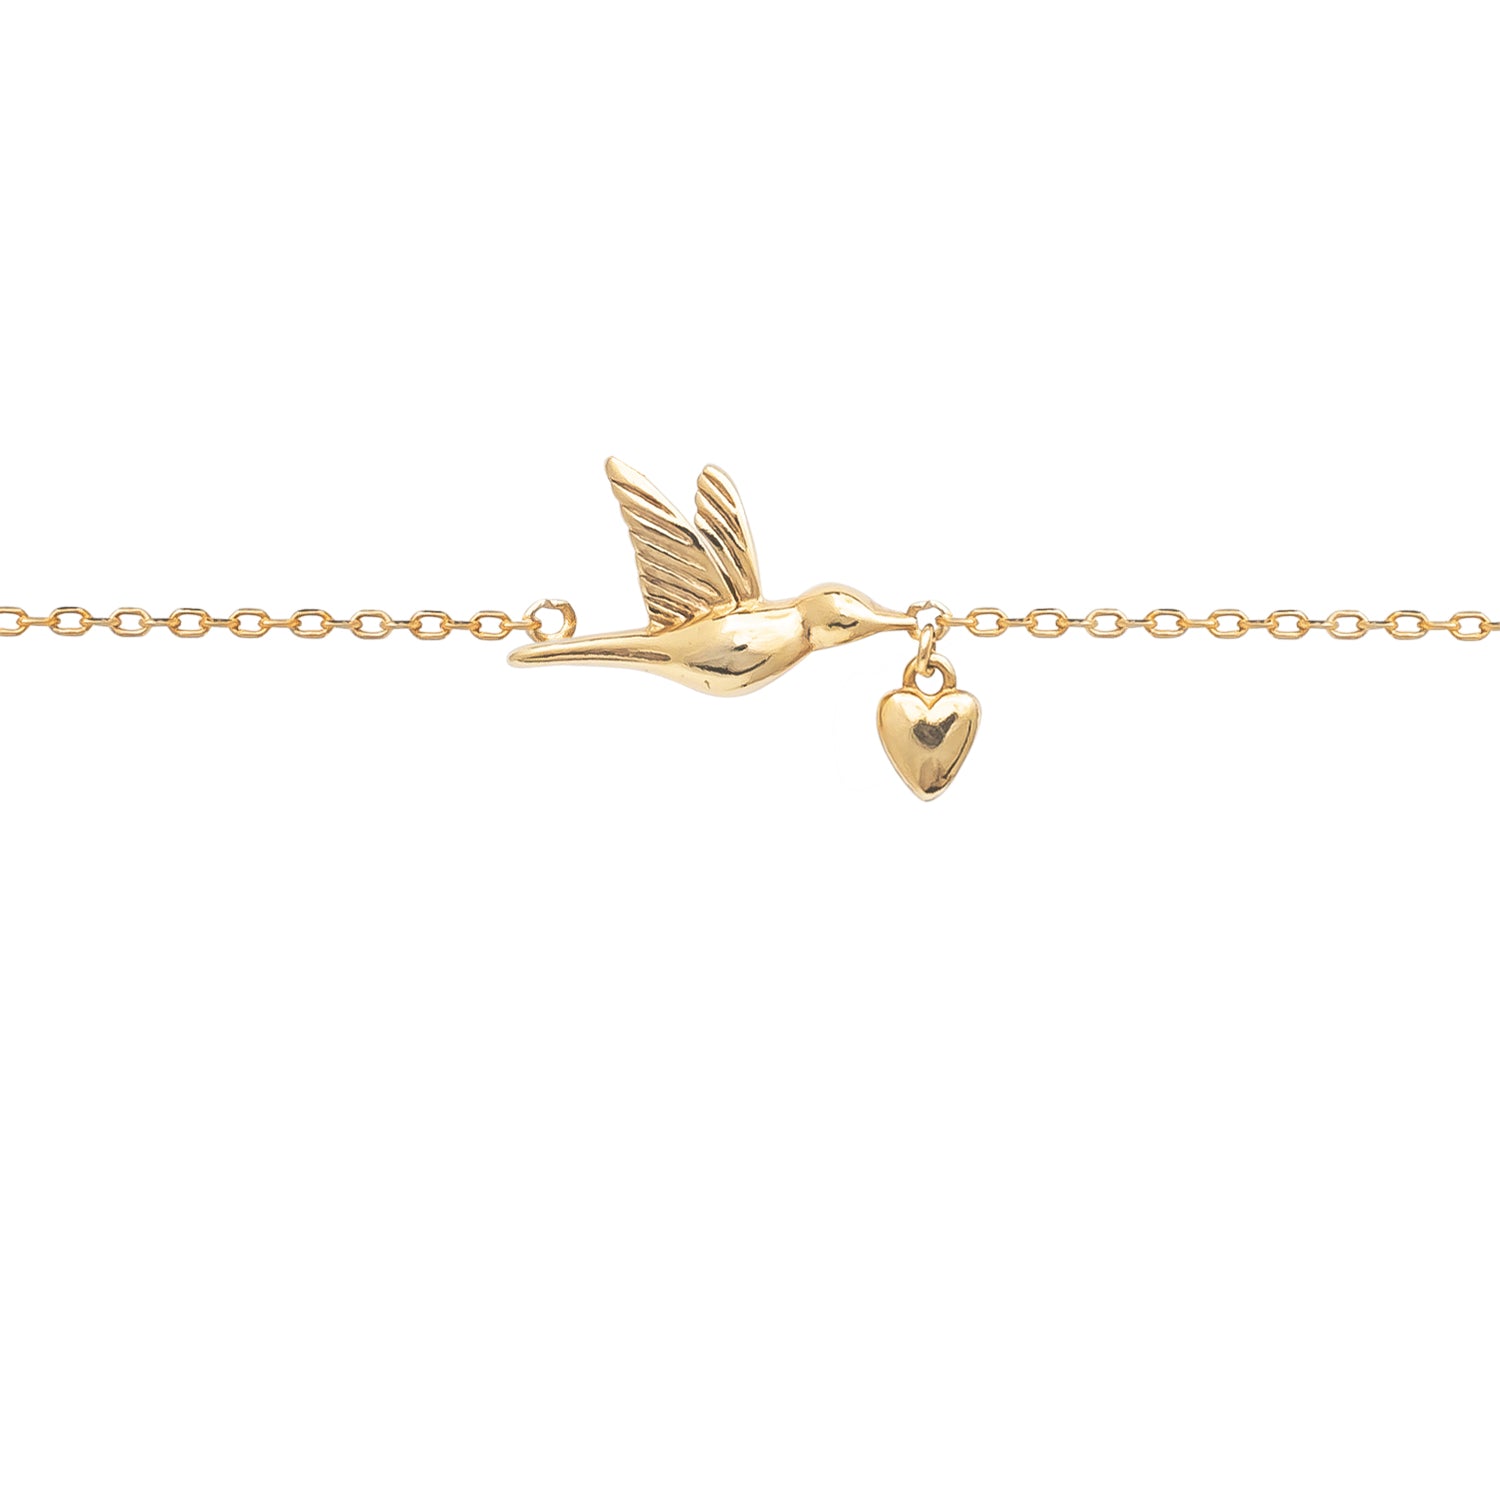 Bird and heart necklace, yellow gold plated